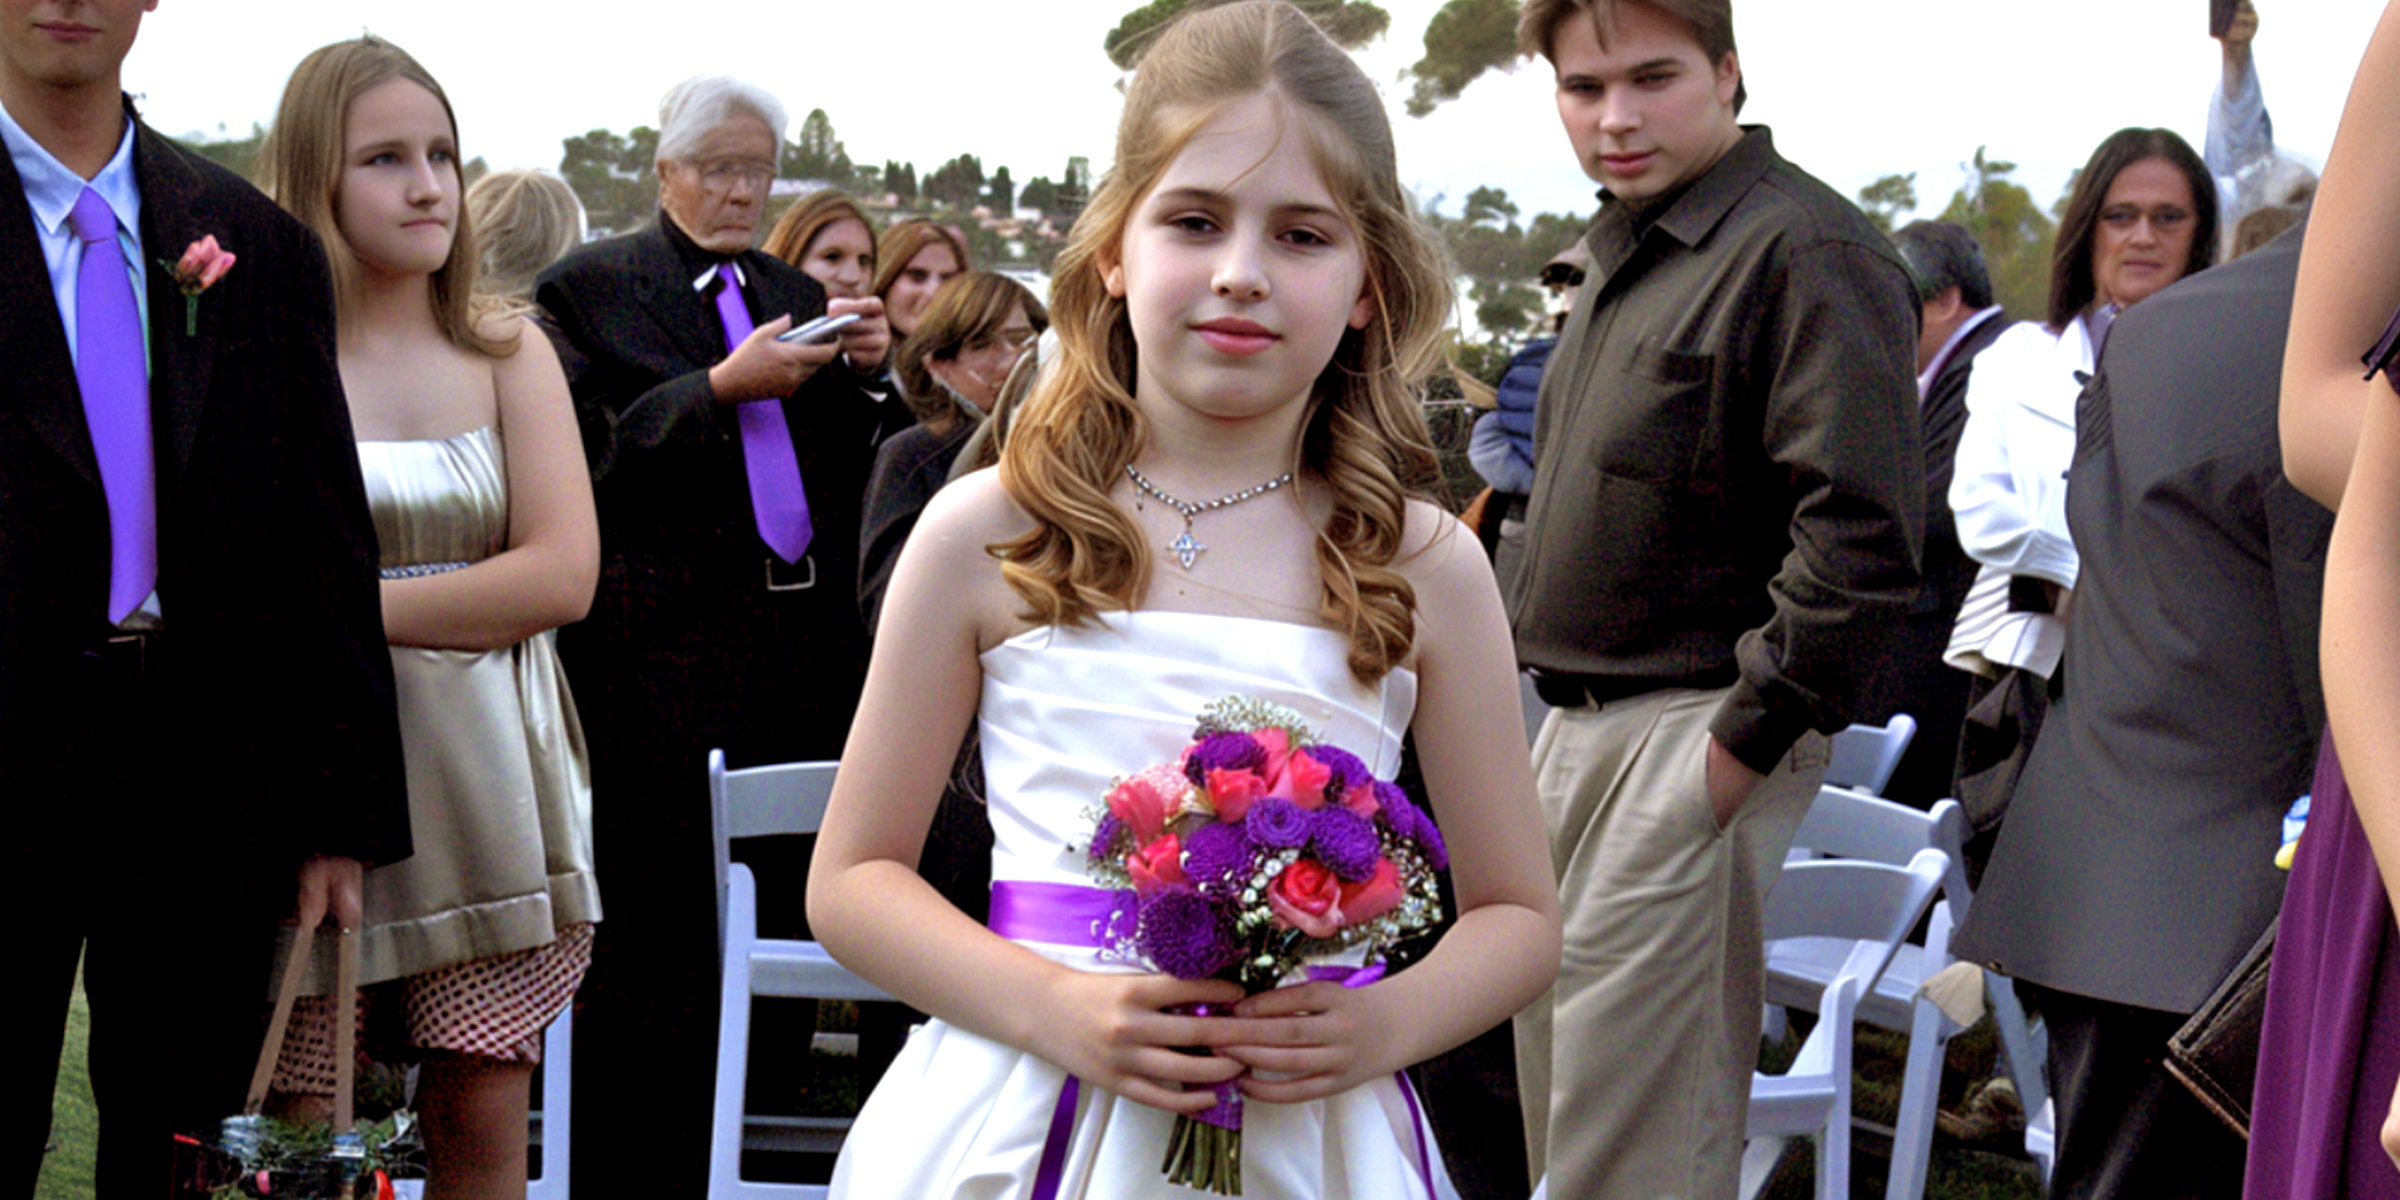 A flower girl walking down the aisle | Source: AmoMama